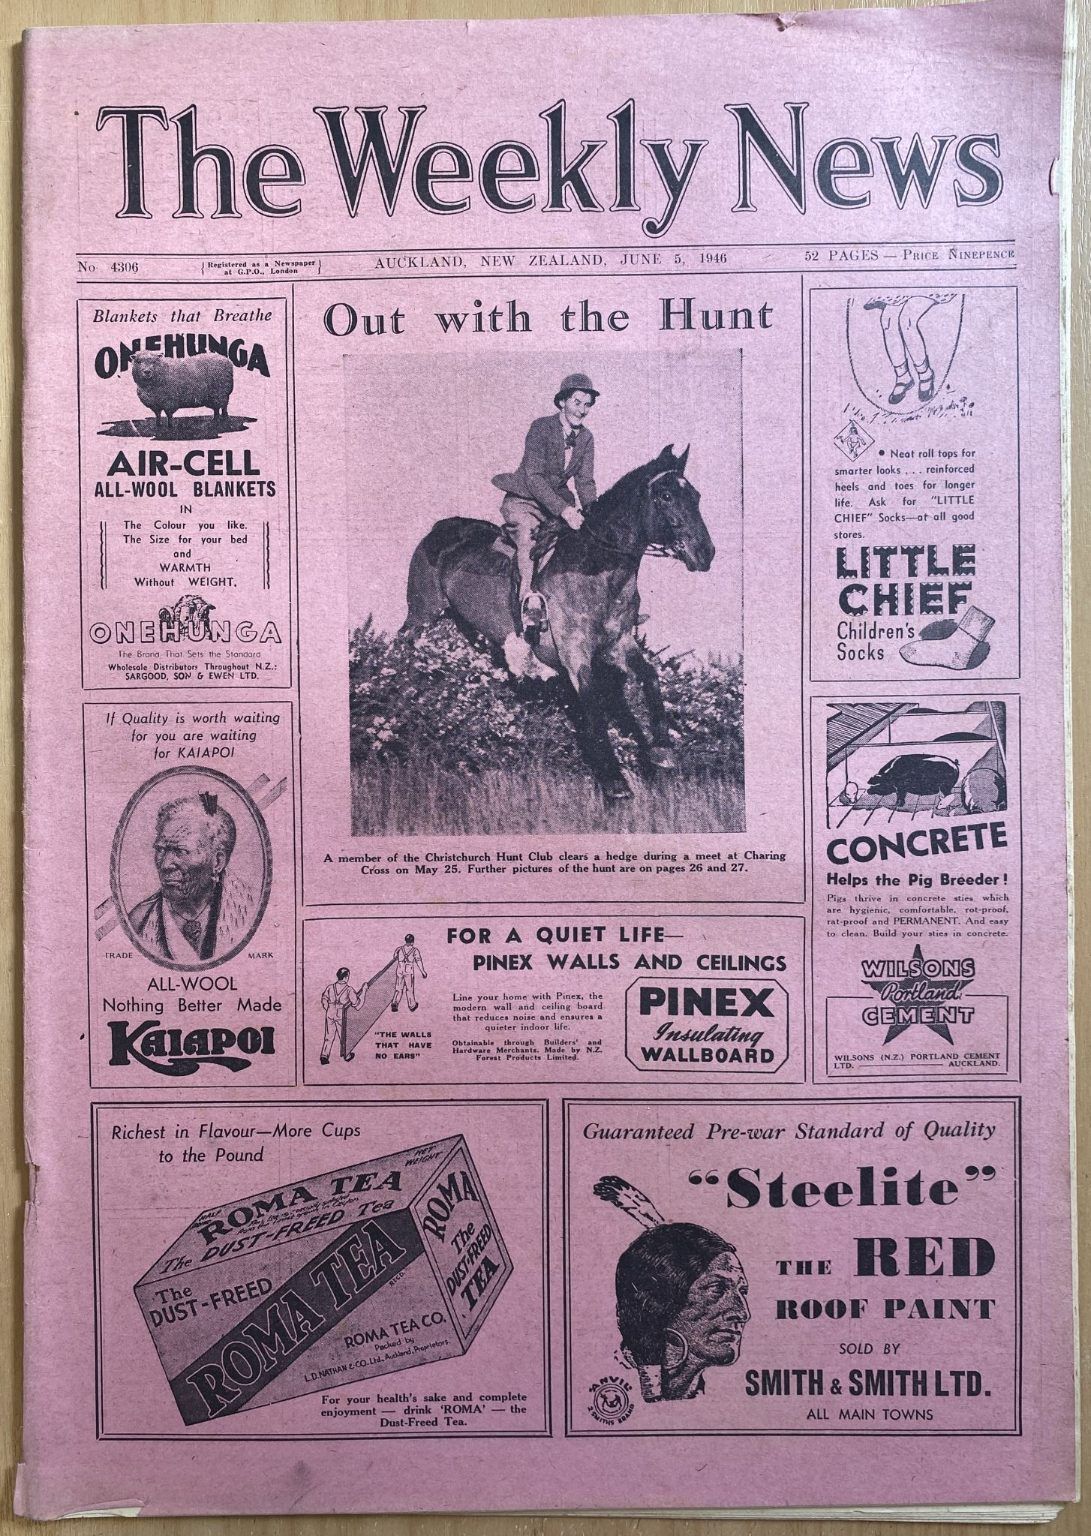 OLD NEWSPAPER: The Weekly News - No. 4306, 5 June 1946